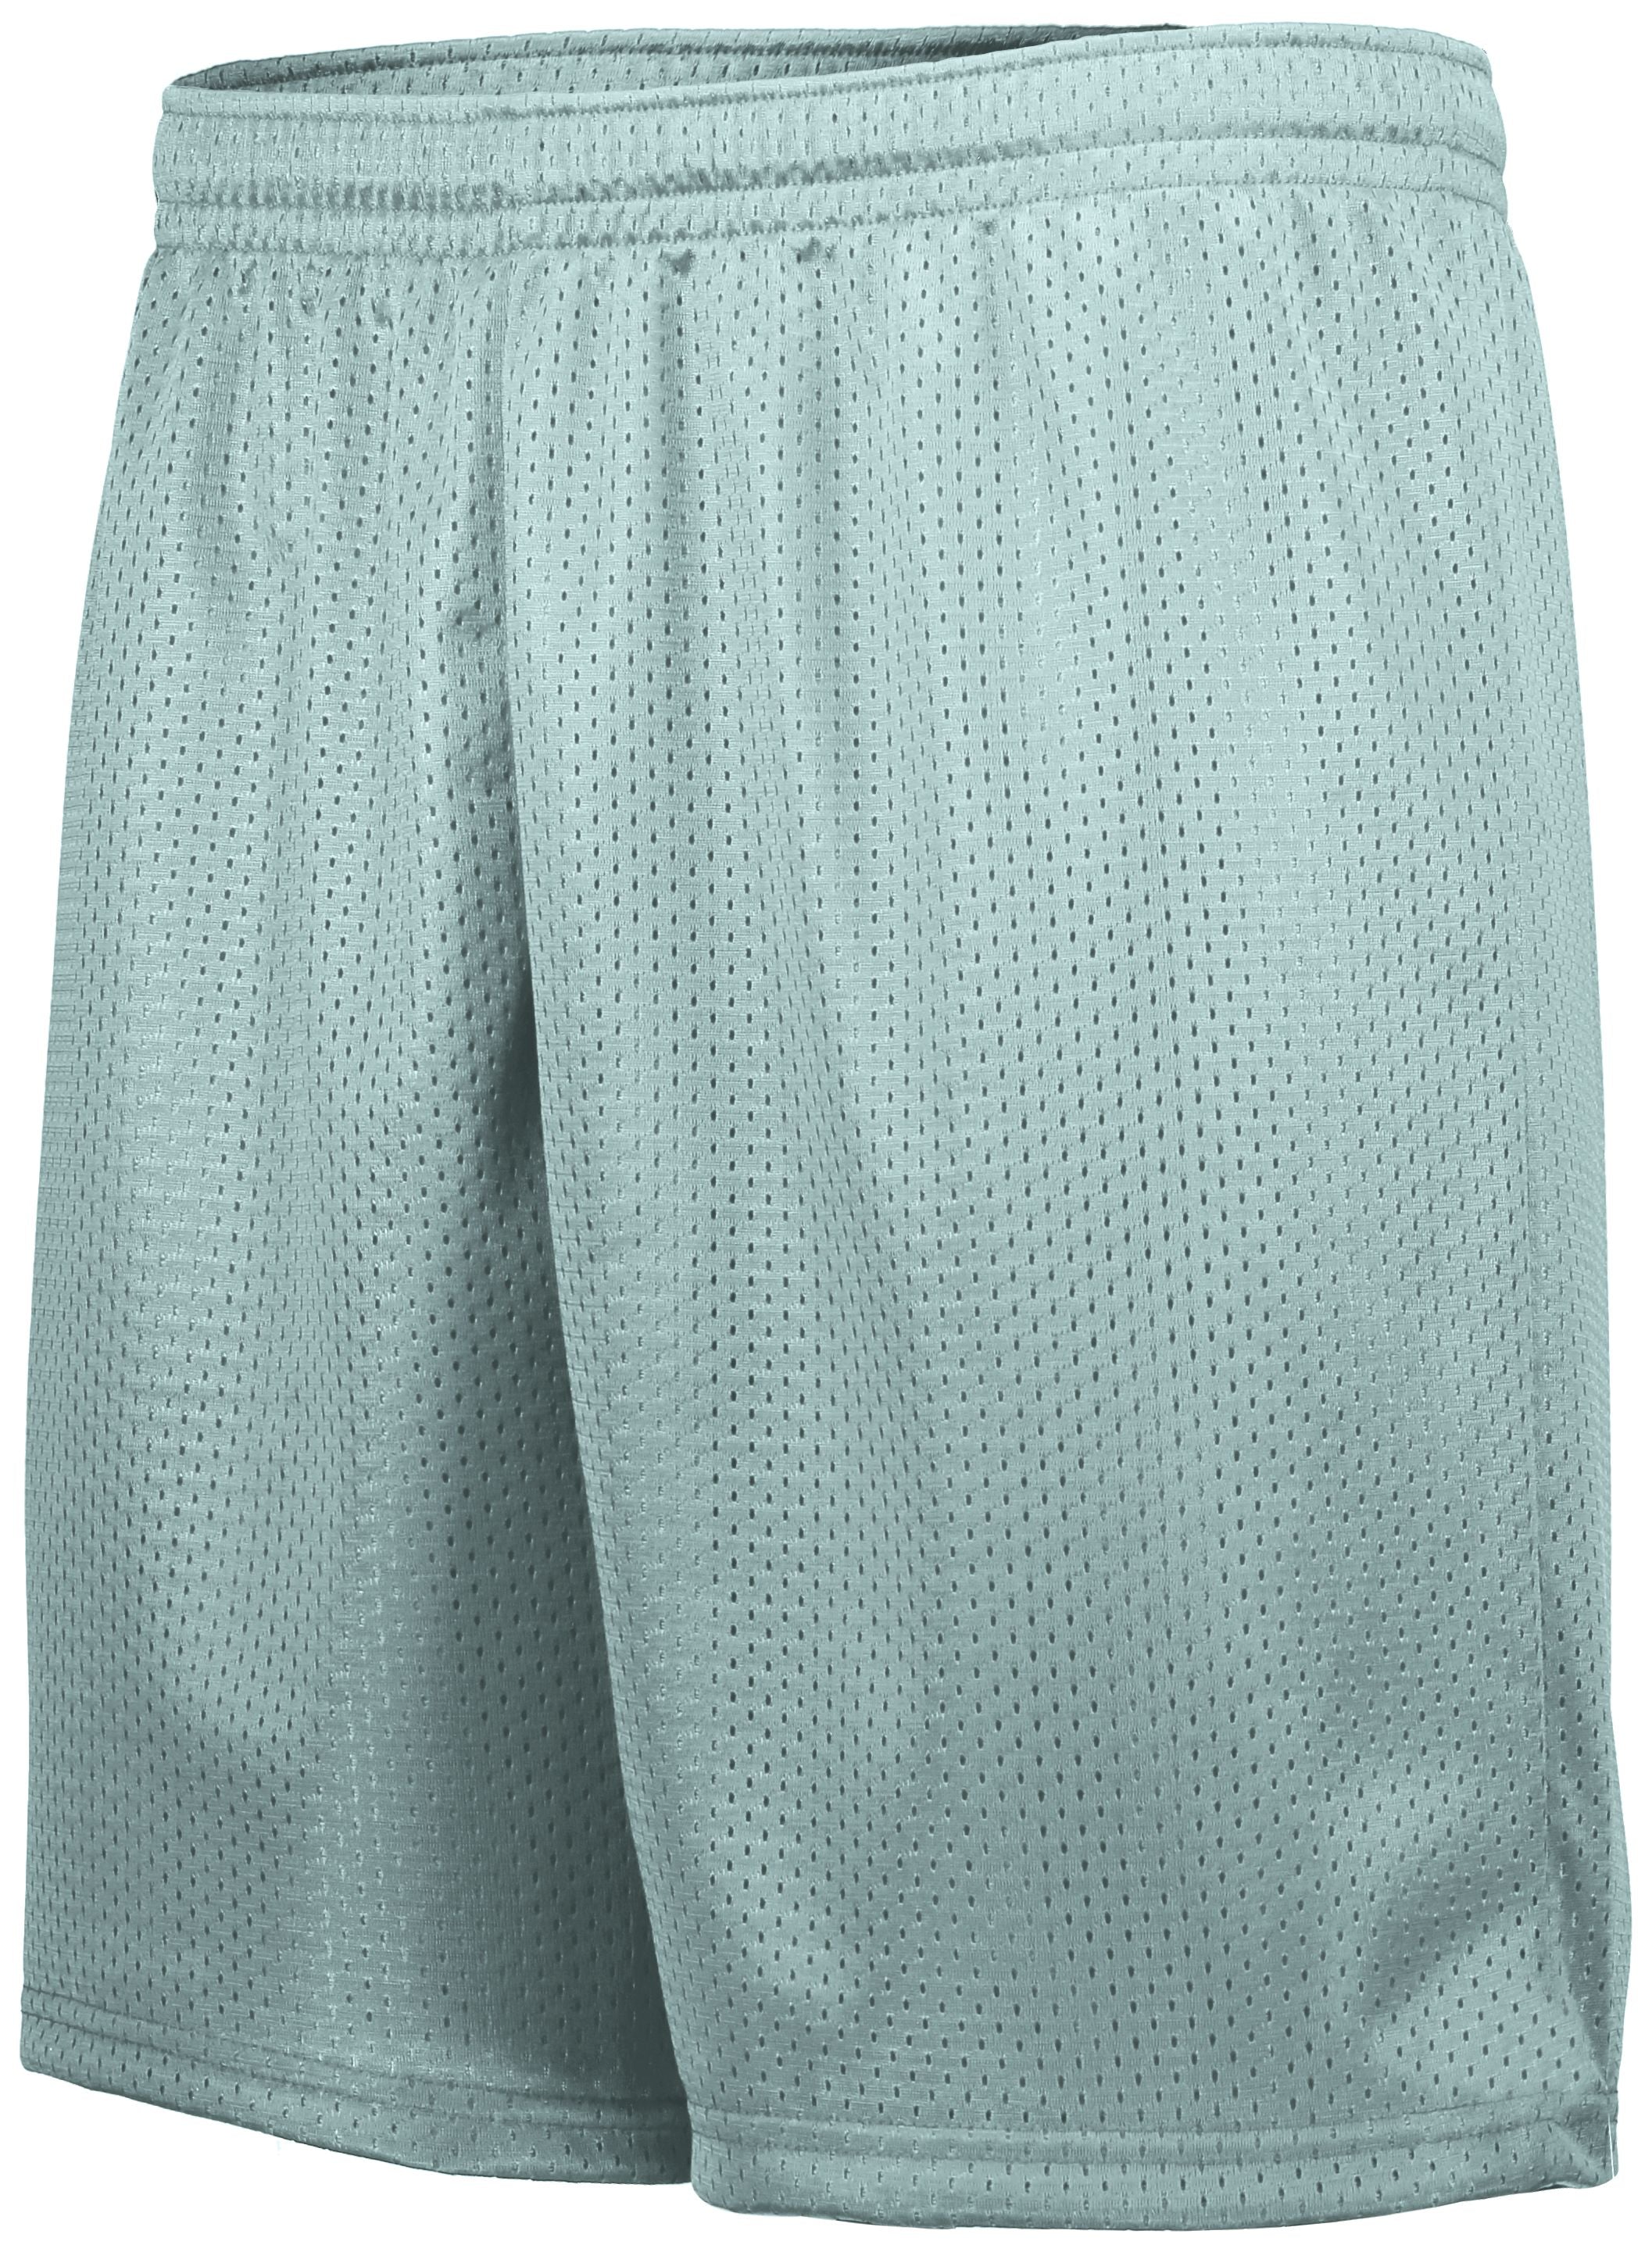 Augusta Sportswear Youth Tricot Mesh Shorts in Silver  -Part of the Youth, Youth-Shorts, Augusta-Products product lines at KanaleyCreations.com